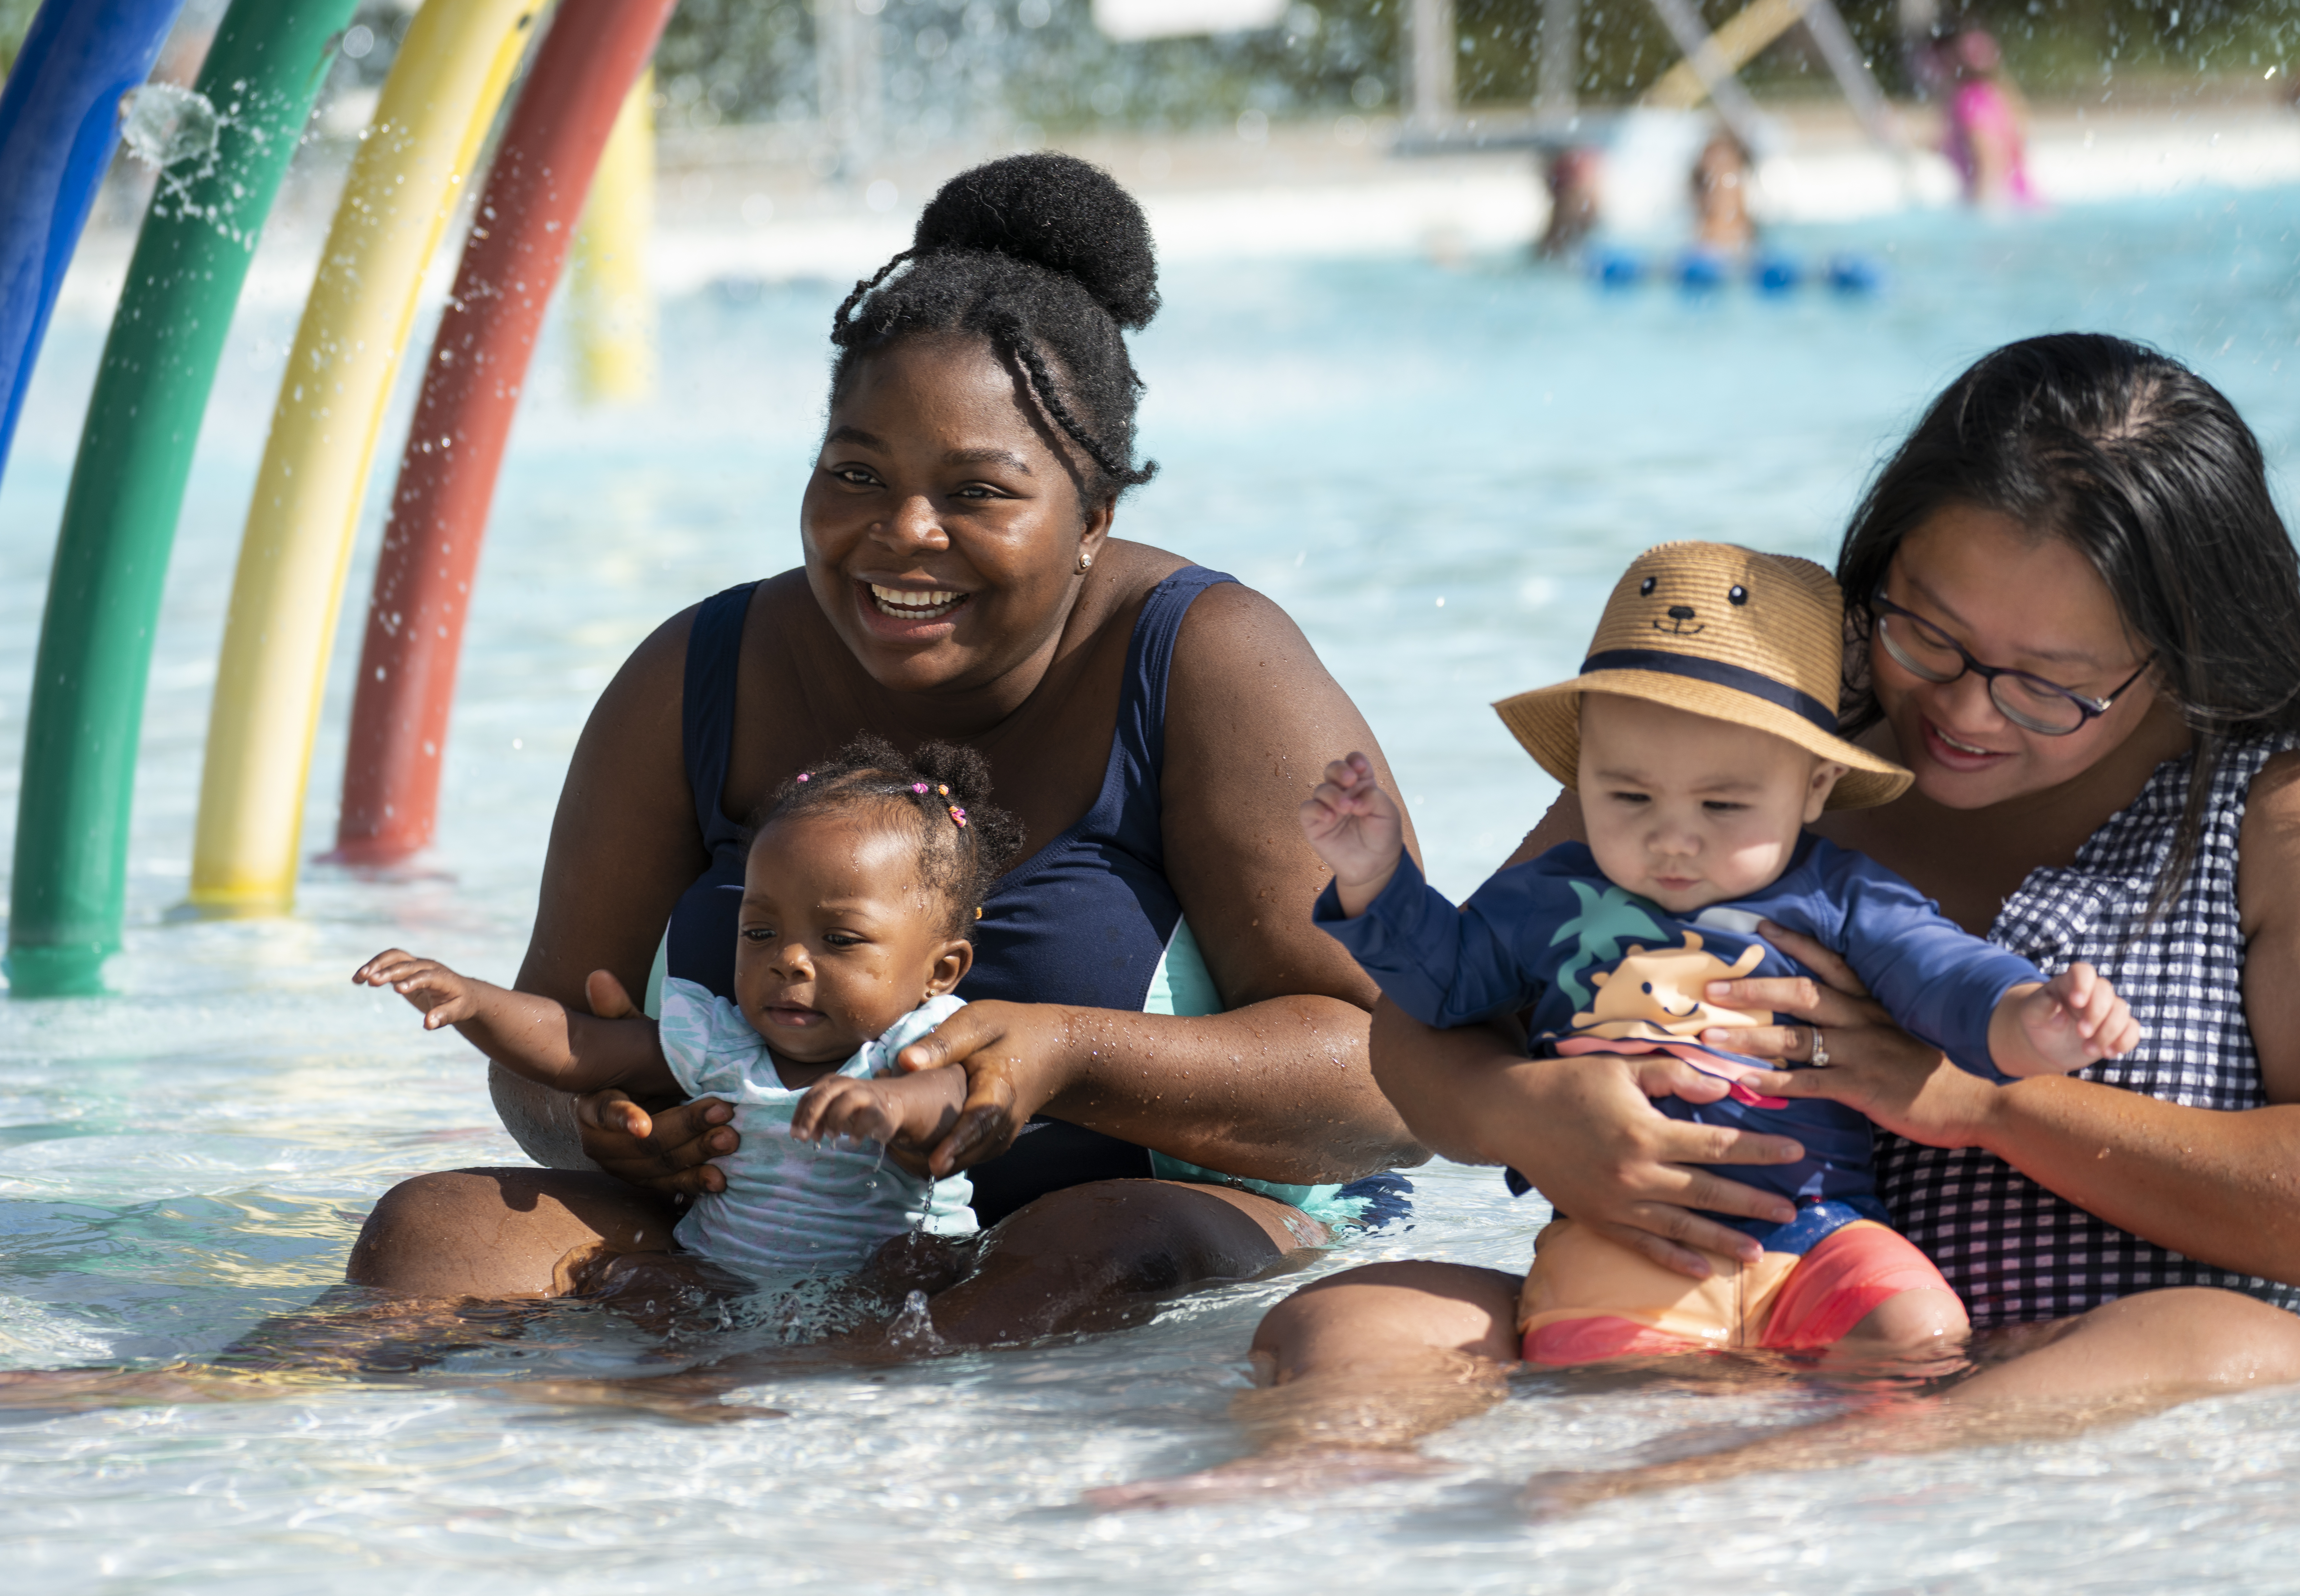 Two moms with their infants sitting in the water at the lake lisgar waterpark on a bright sunny day